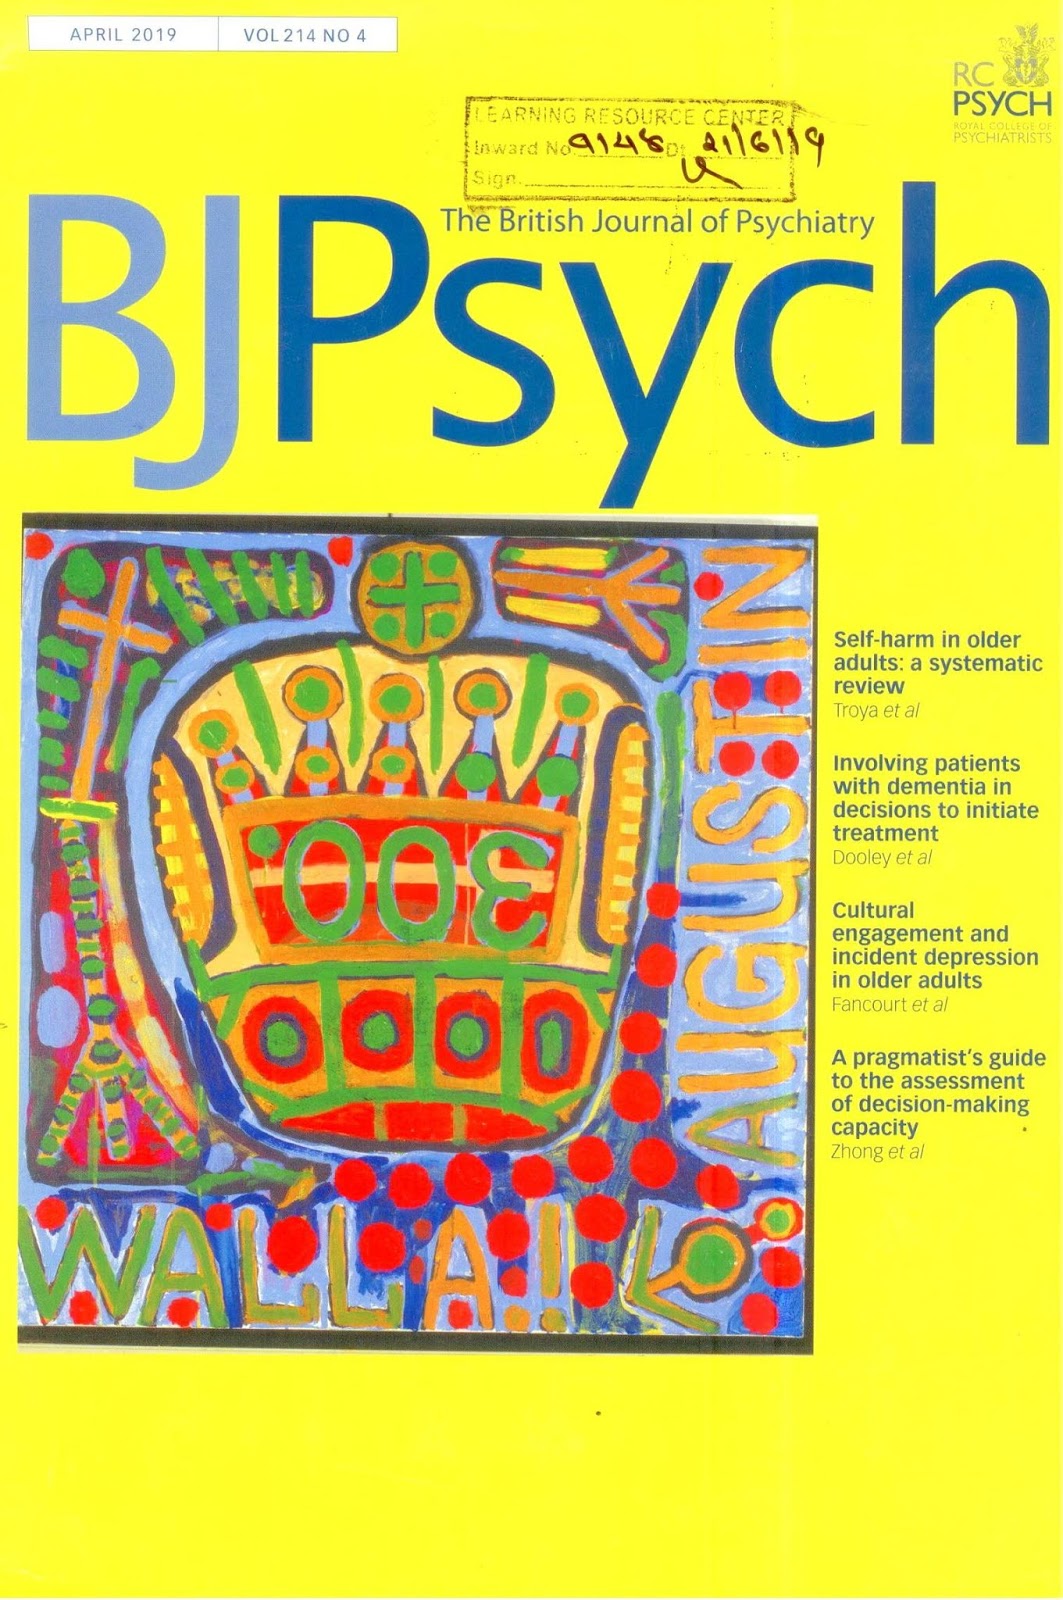 https://www.cambridge.org/core/journals/the-british-journal-of-psychiatry/issue/E789BFF367952FEFDEB2D160BA669100